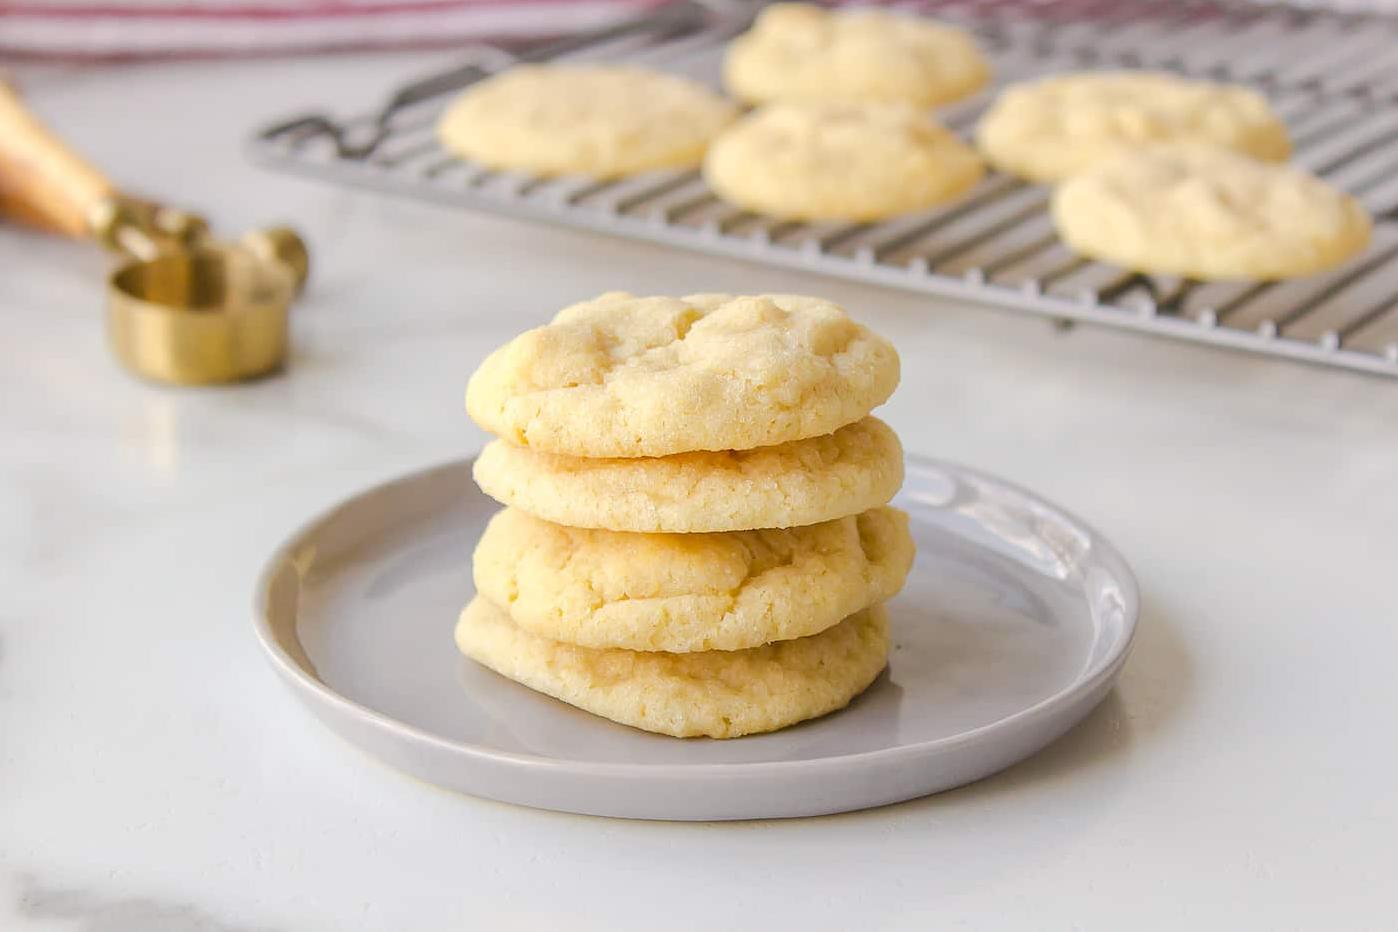  Get ready to be amazed by these yummy cookies!